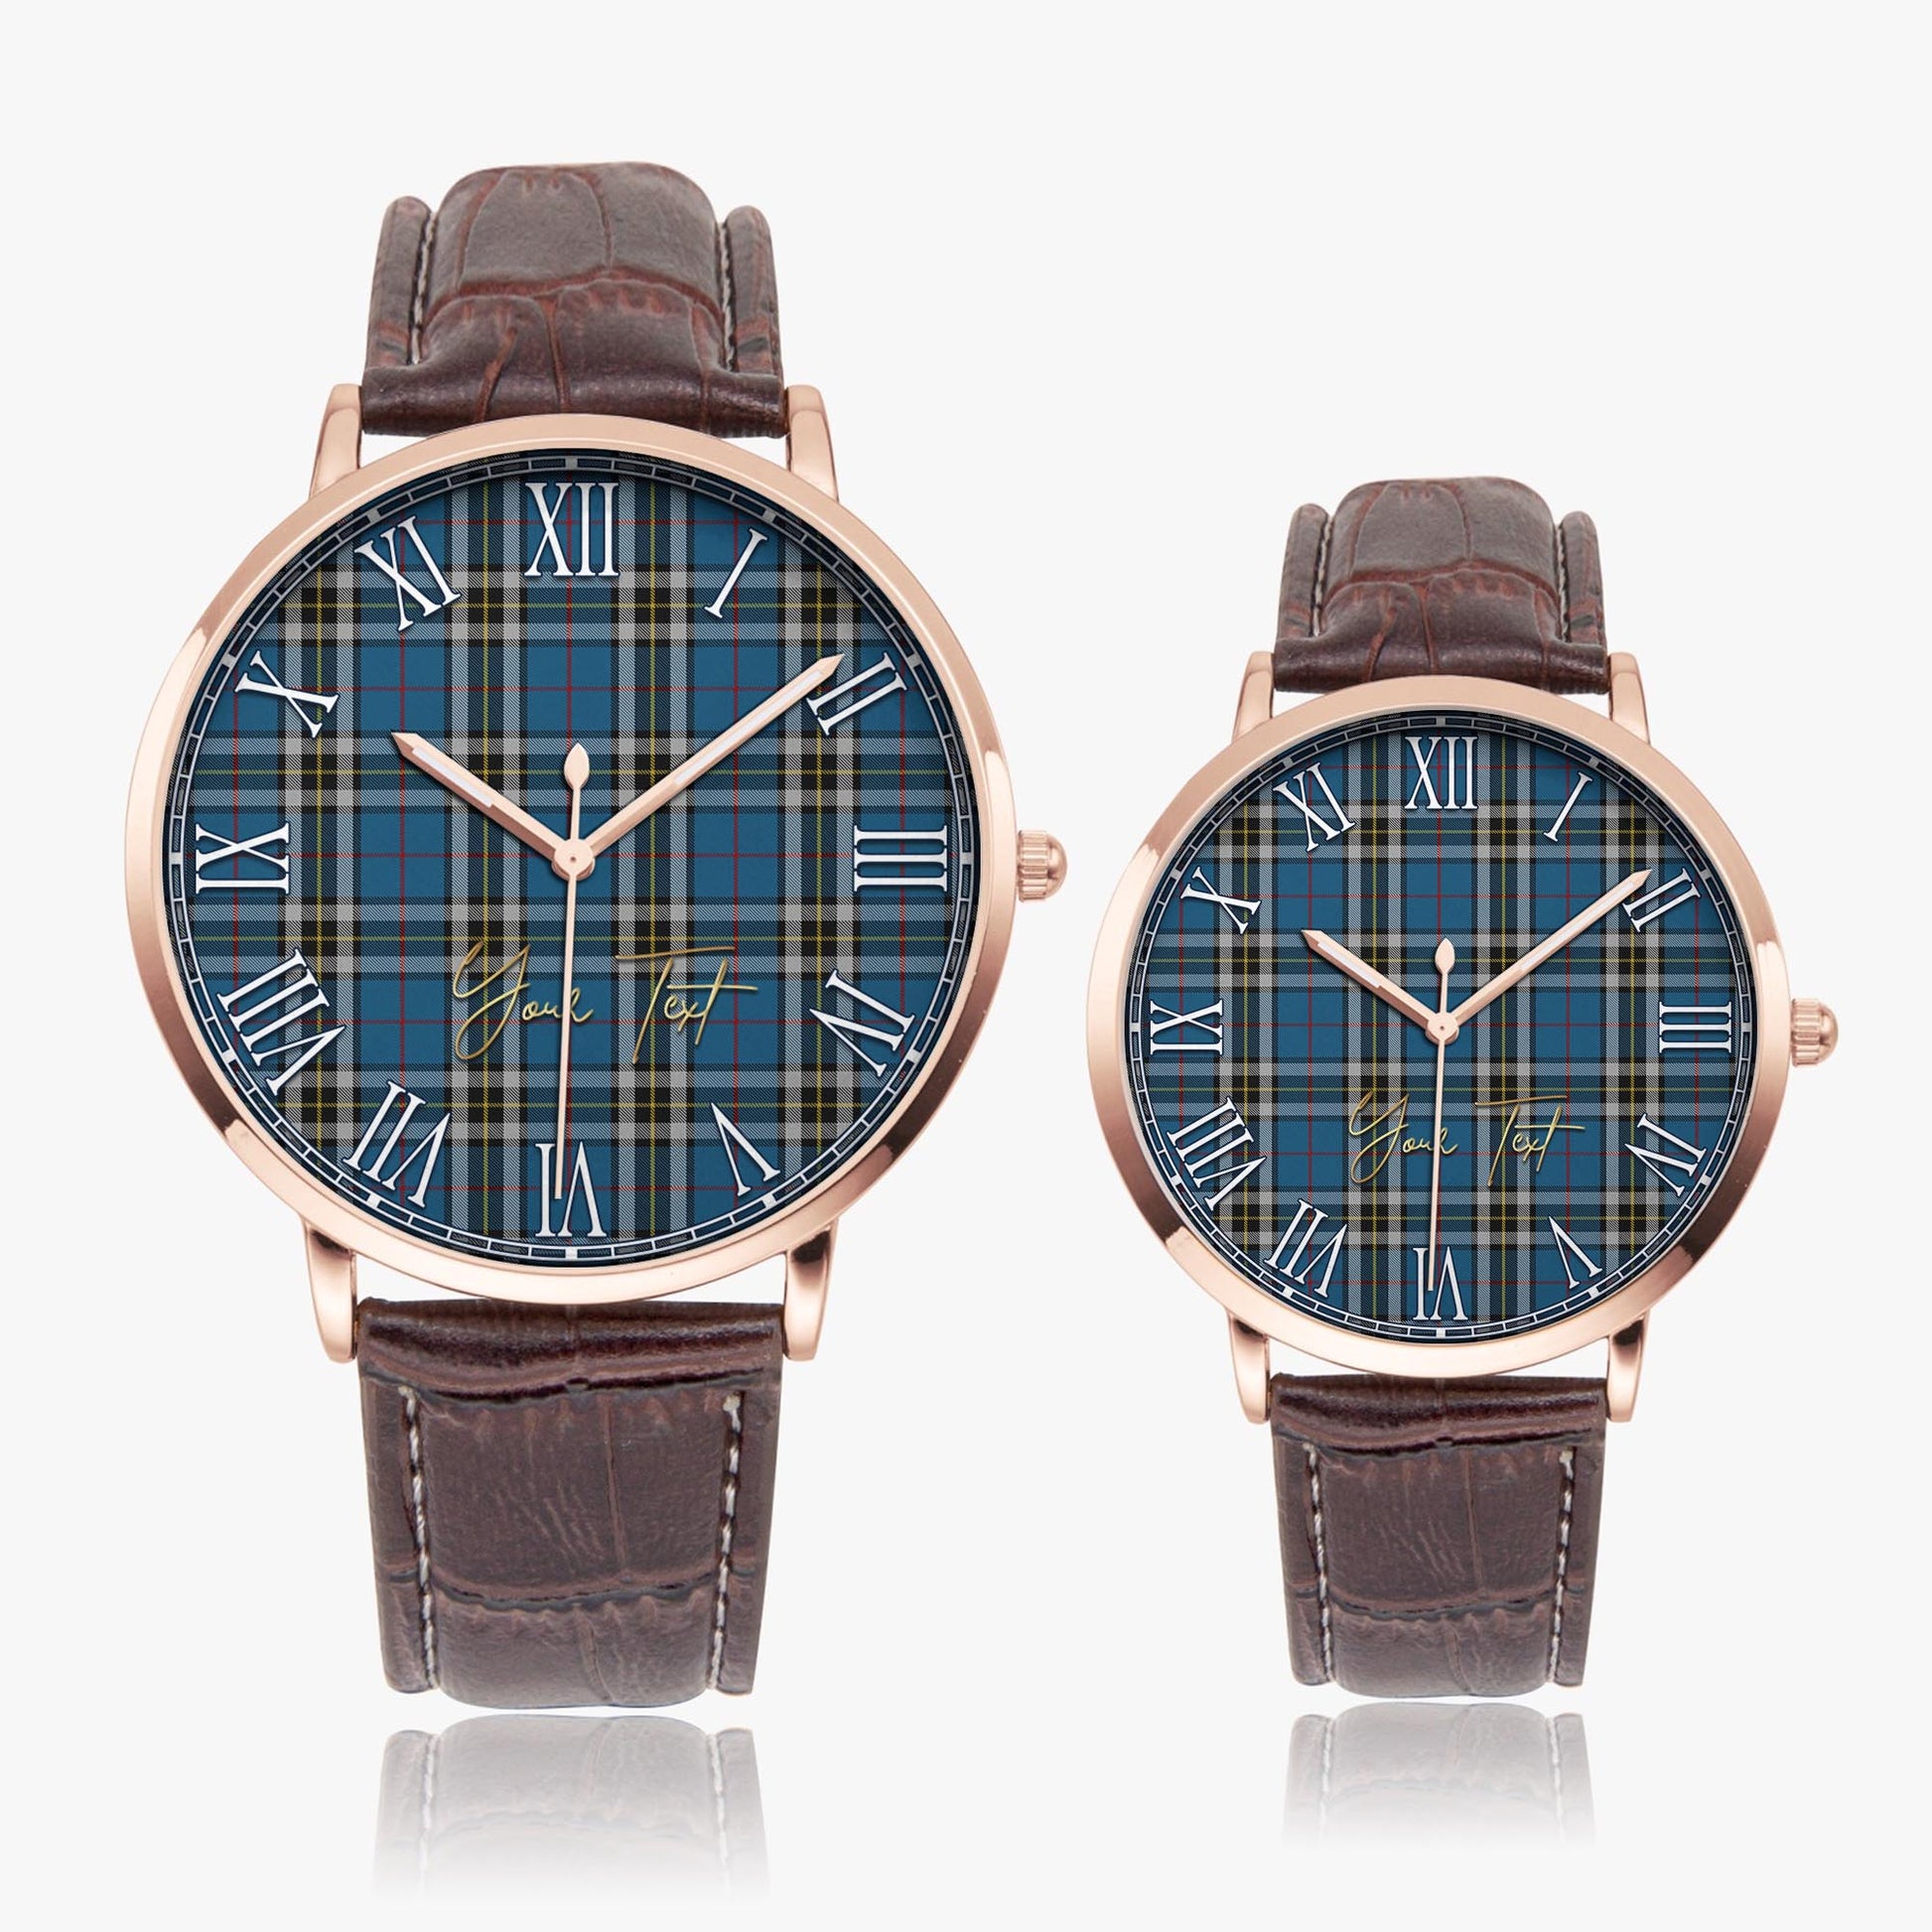 Thomson Dress Blue Tartan Personalized Your Text Leather Trap Quartz Watch Ultra Thin Rose Gold Case With Brown Leather Strap - Tartanvibesclothing Shop